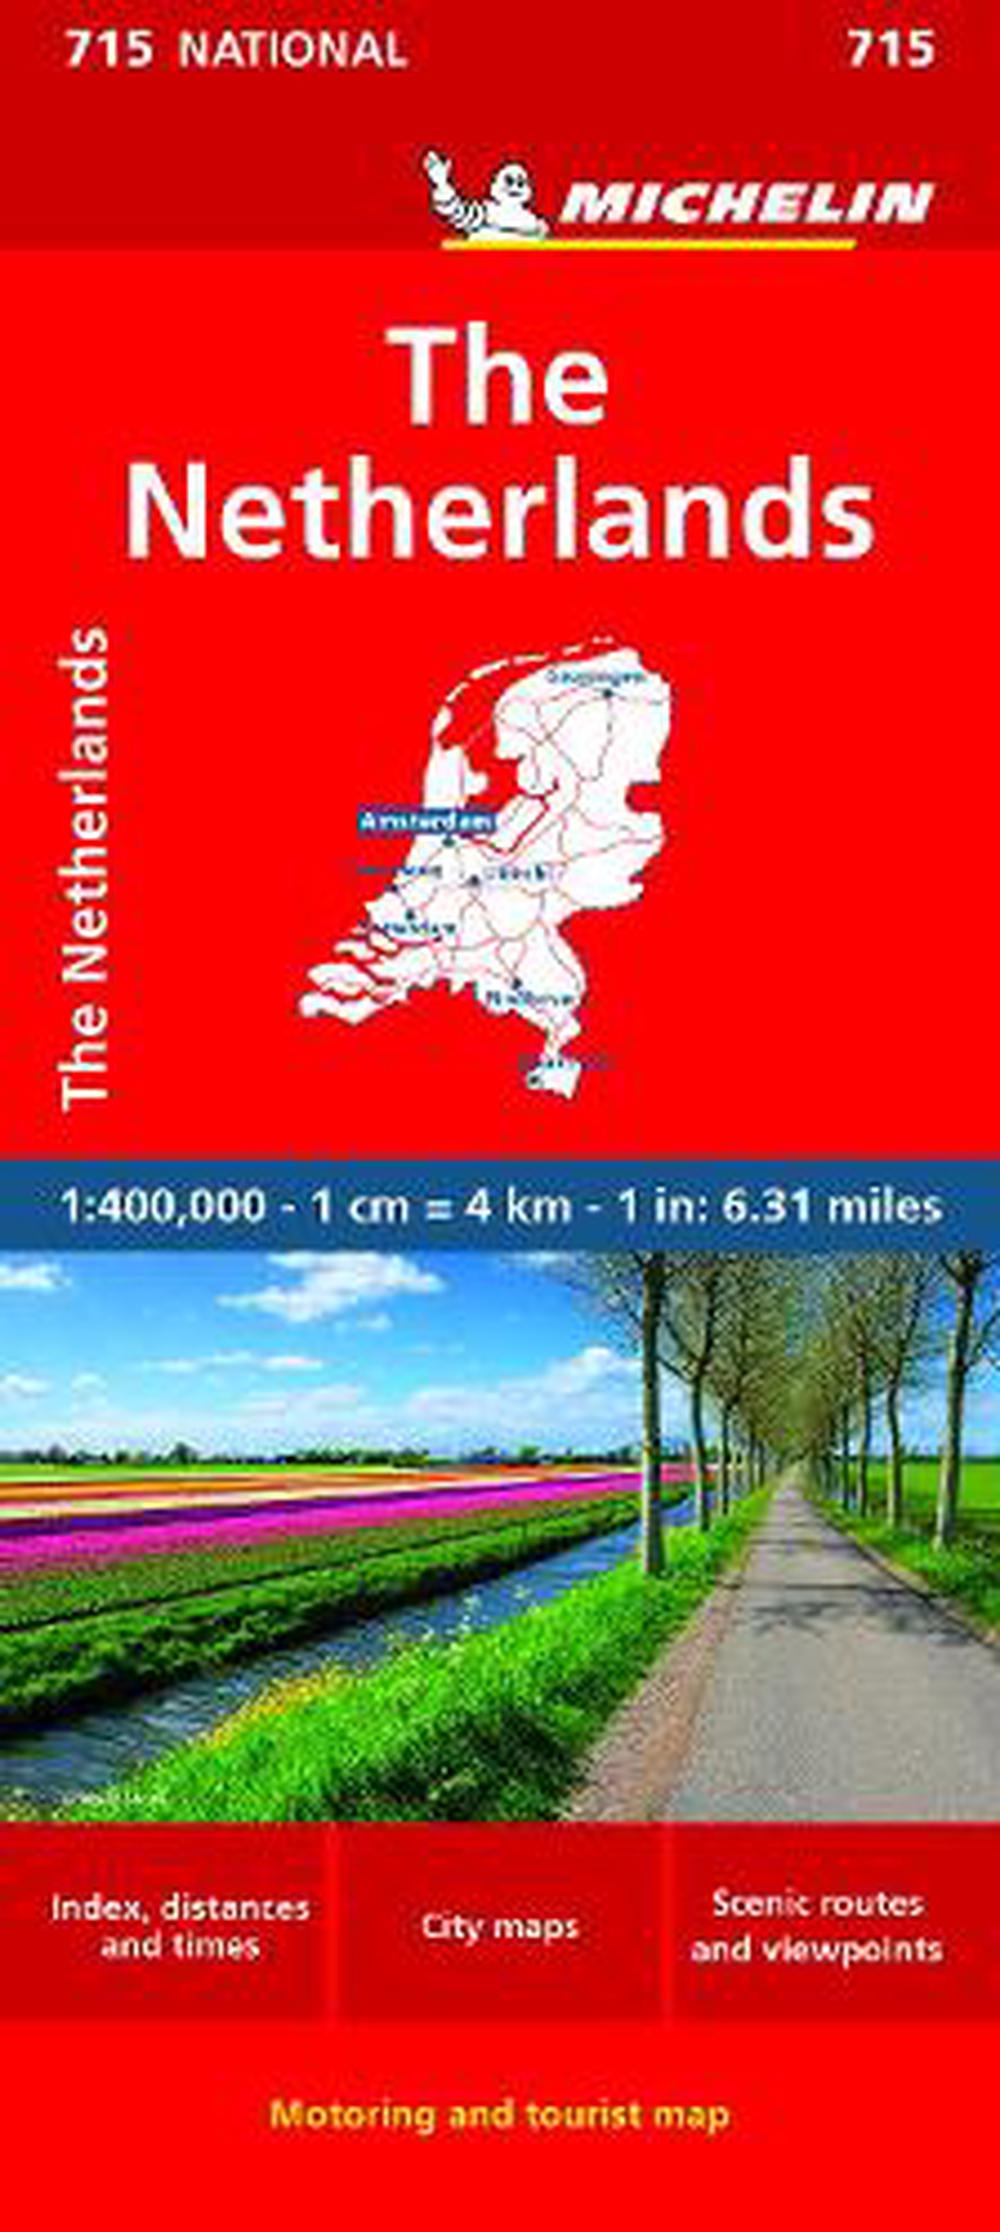 Michelin the Netherlands Road and Tourist Map by Michelin Travel